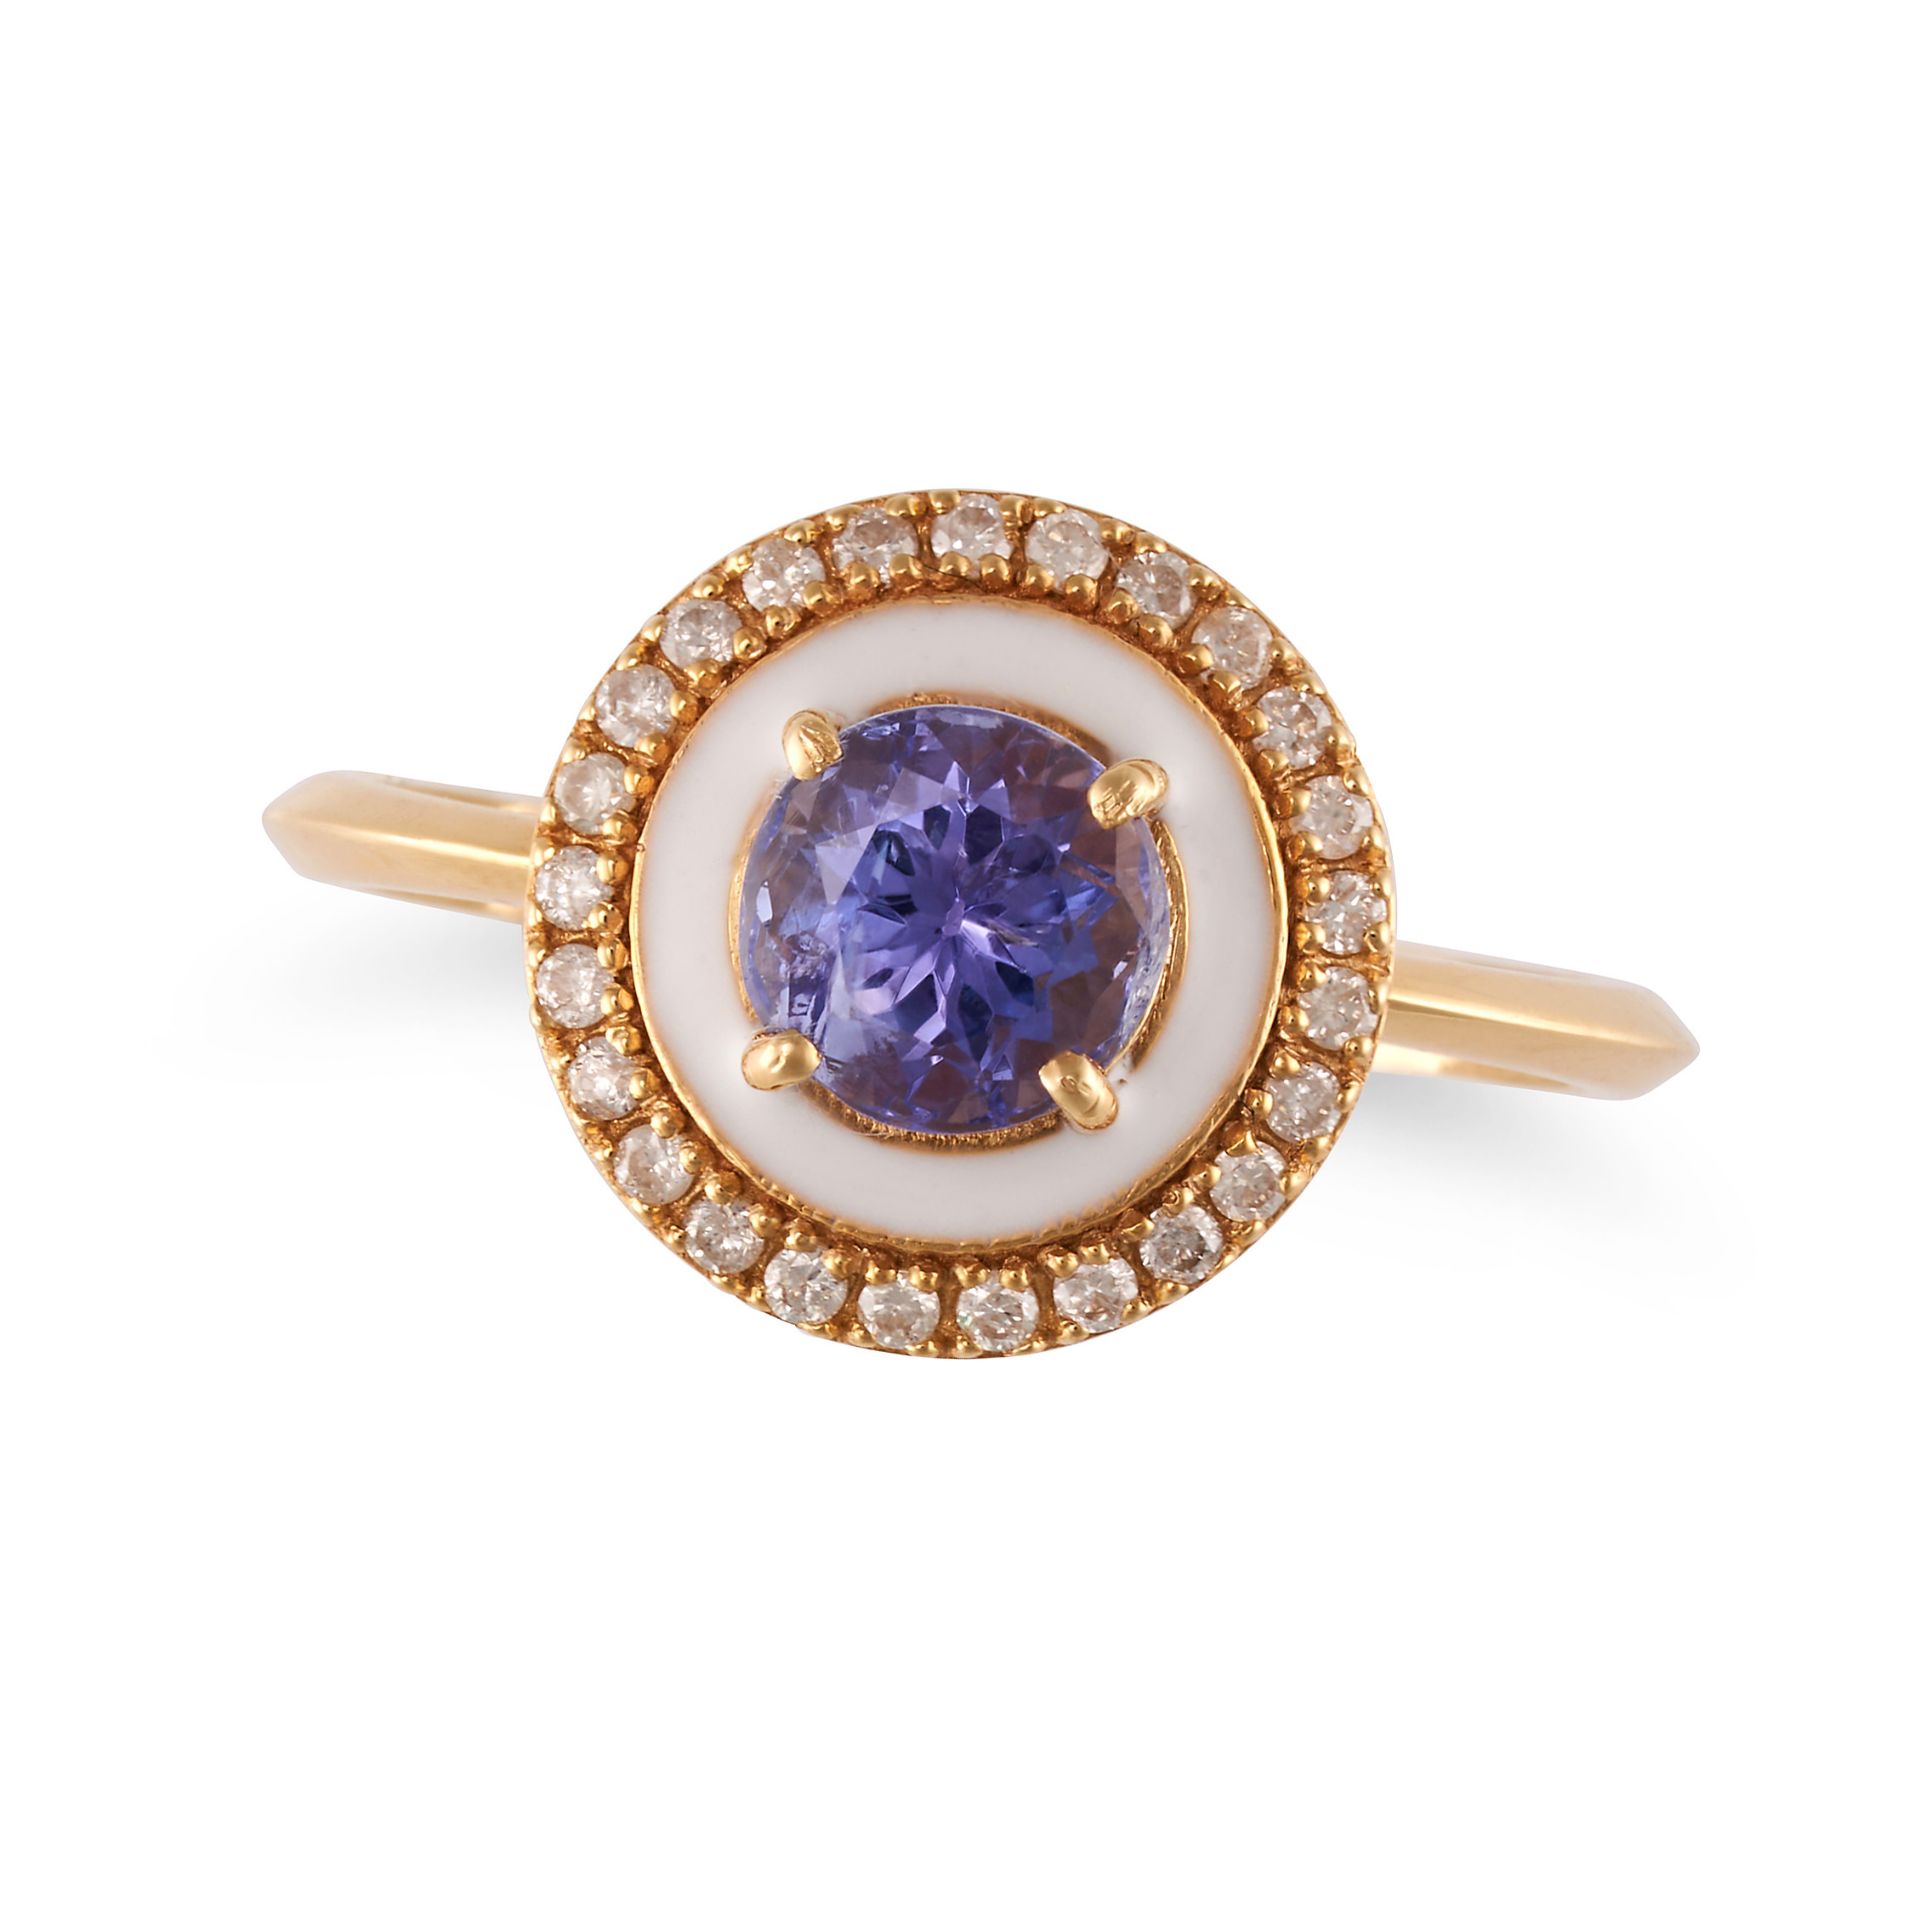 A TANZANITE, DIAMOND AND ENAMEL RING in 18ct yellow gold, set with a round cut tanzanite in conce...